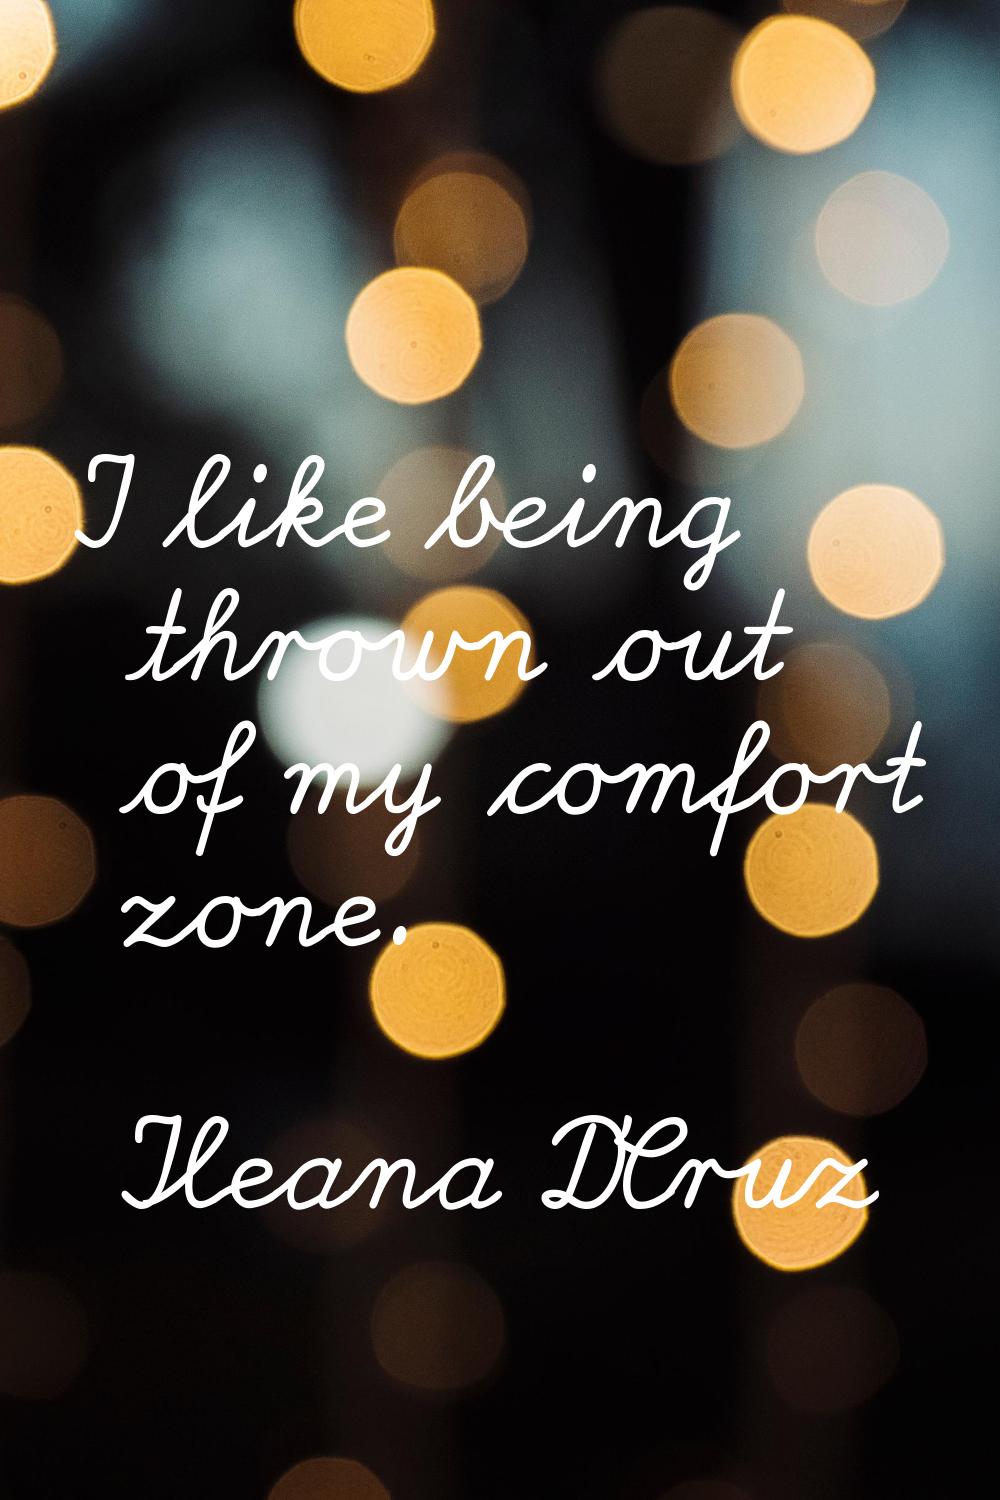 I like being thrown out of my comfort zone.